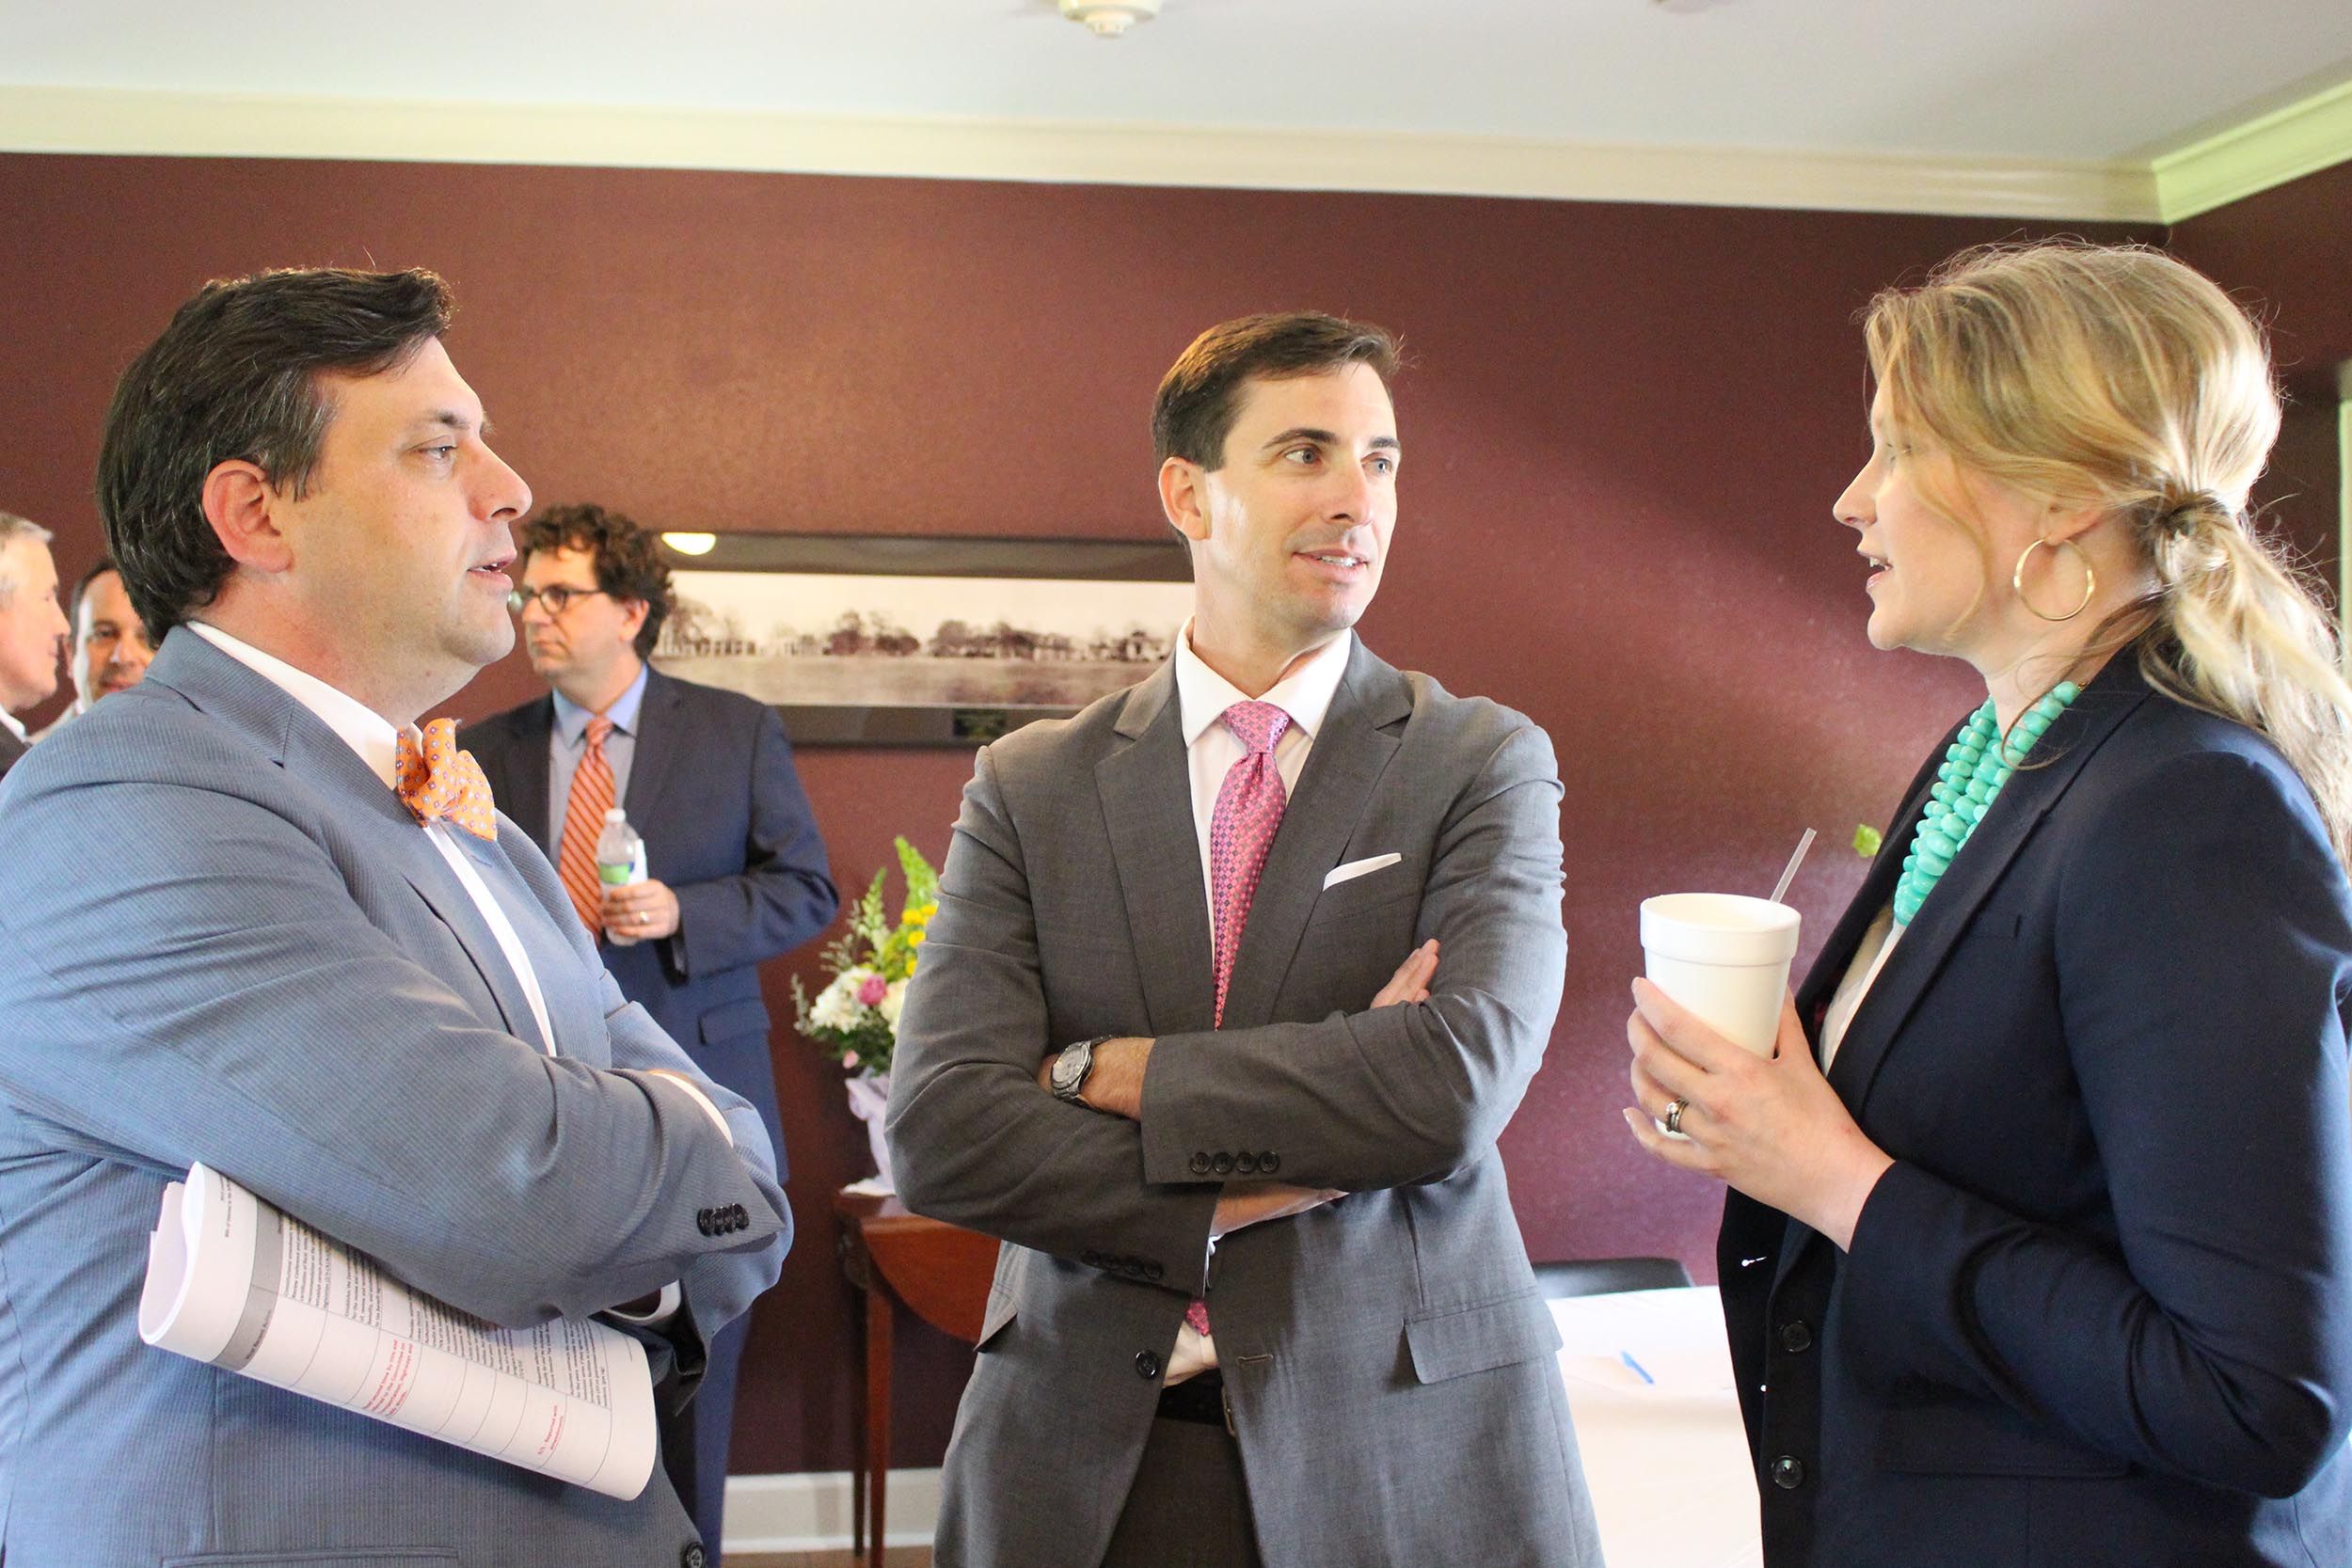 Business people network at an event